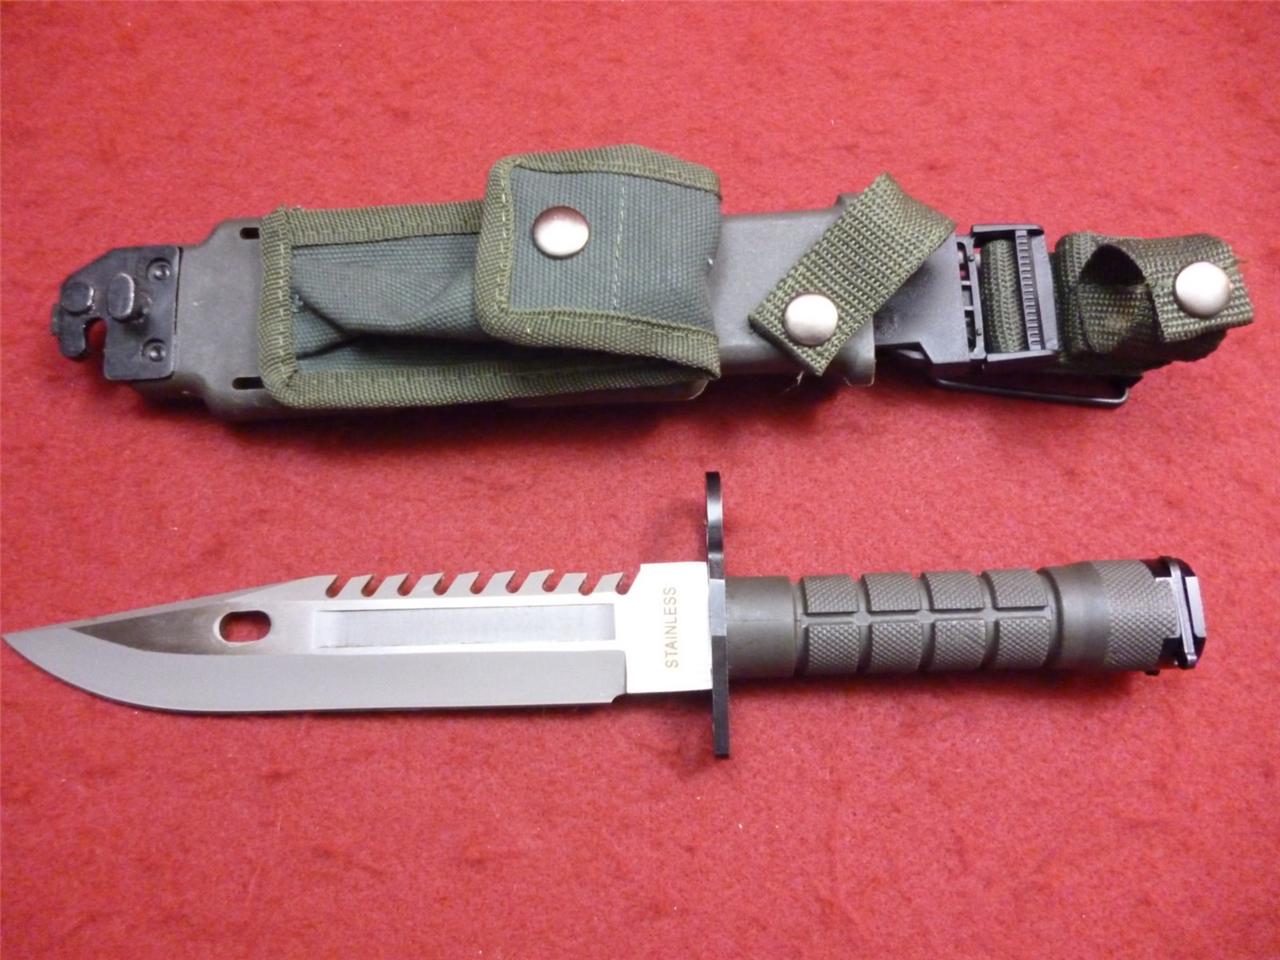 New M9 Replica Bayonet Tactical Knife Military Survival.